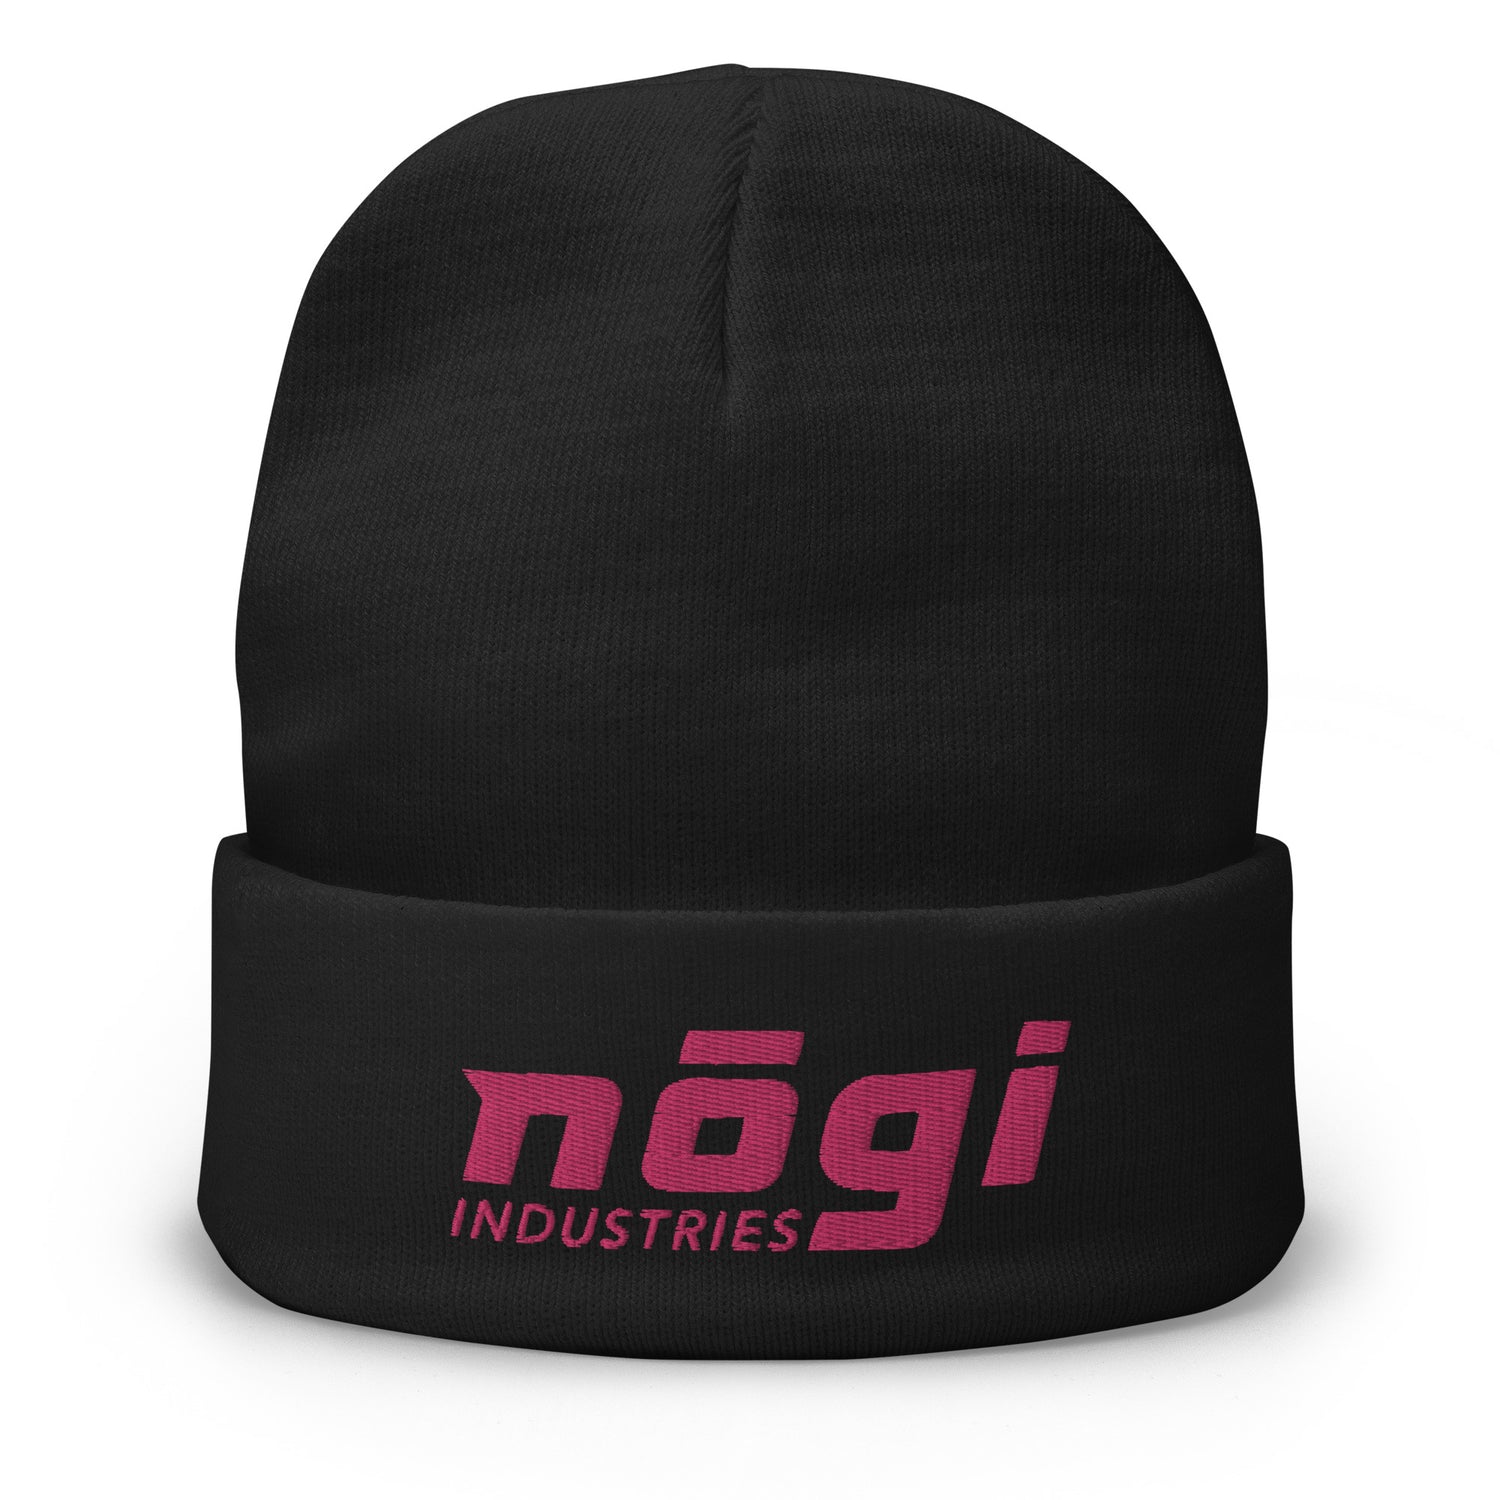 Embroidered Beanie w Puff logo (Black & Pink) by Nogi Industries